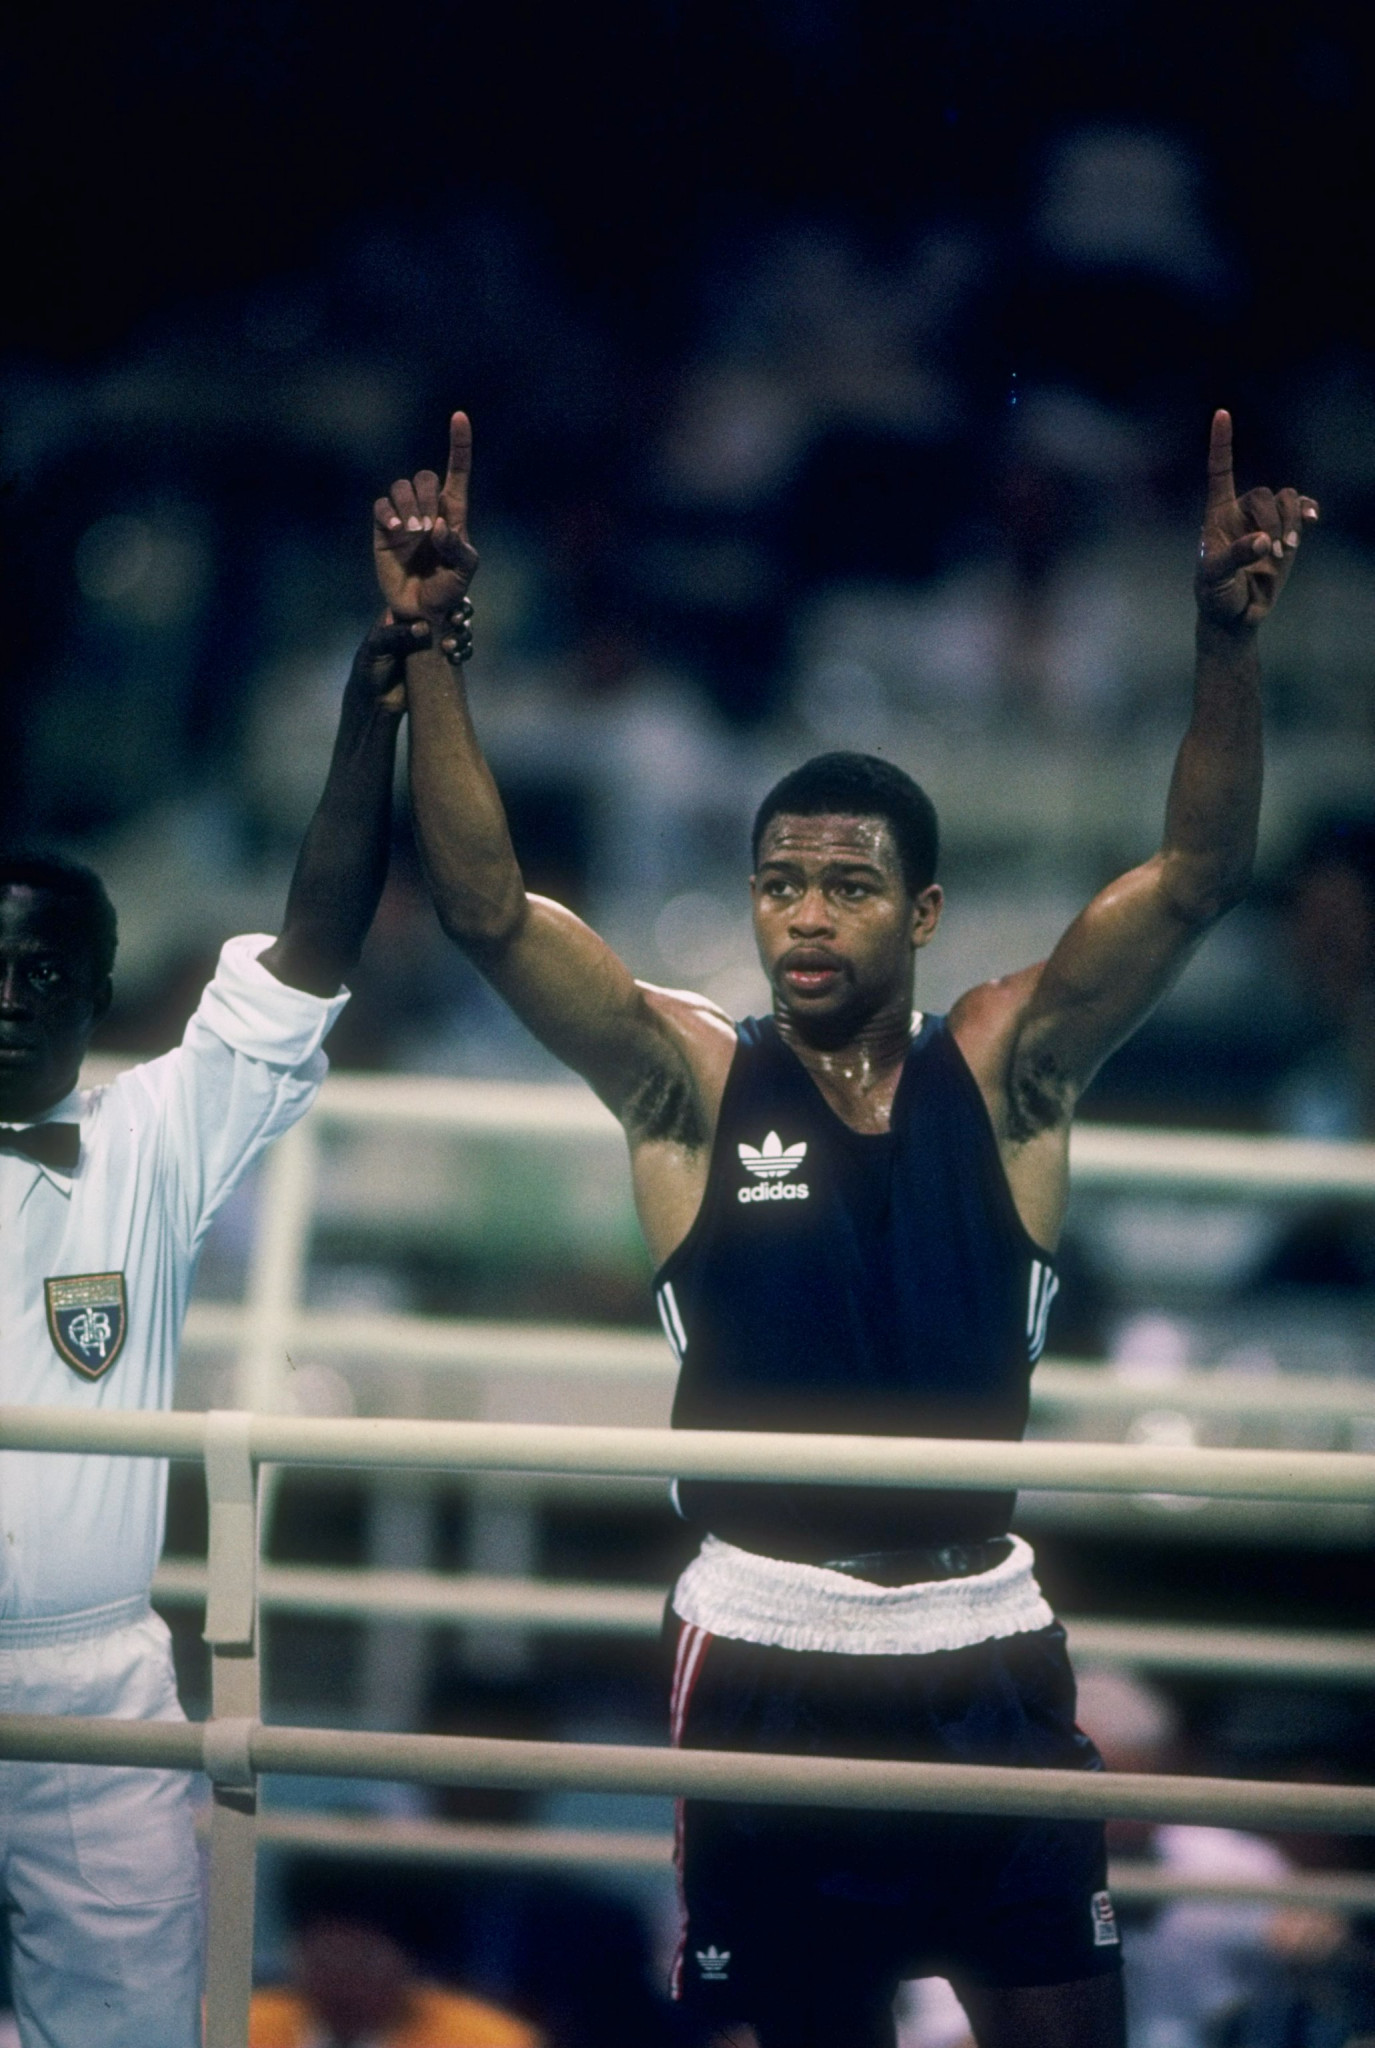 At the Seoul 1988 Olympics, Roy Jones Jr won the the Val Barker Award for the 'most technically proficient' boxer but a controversial and flawed decision robbed him of gold ©Getty Images